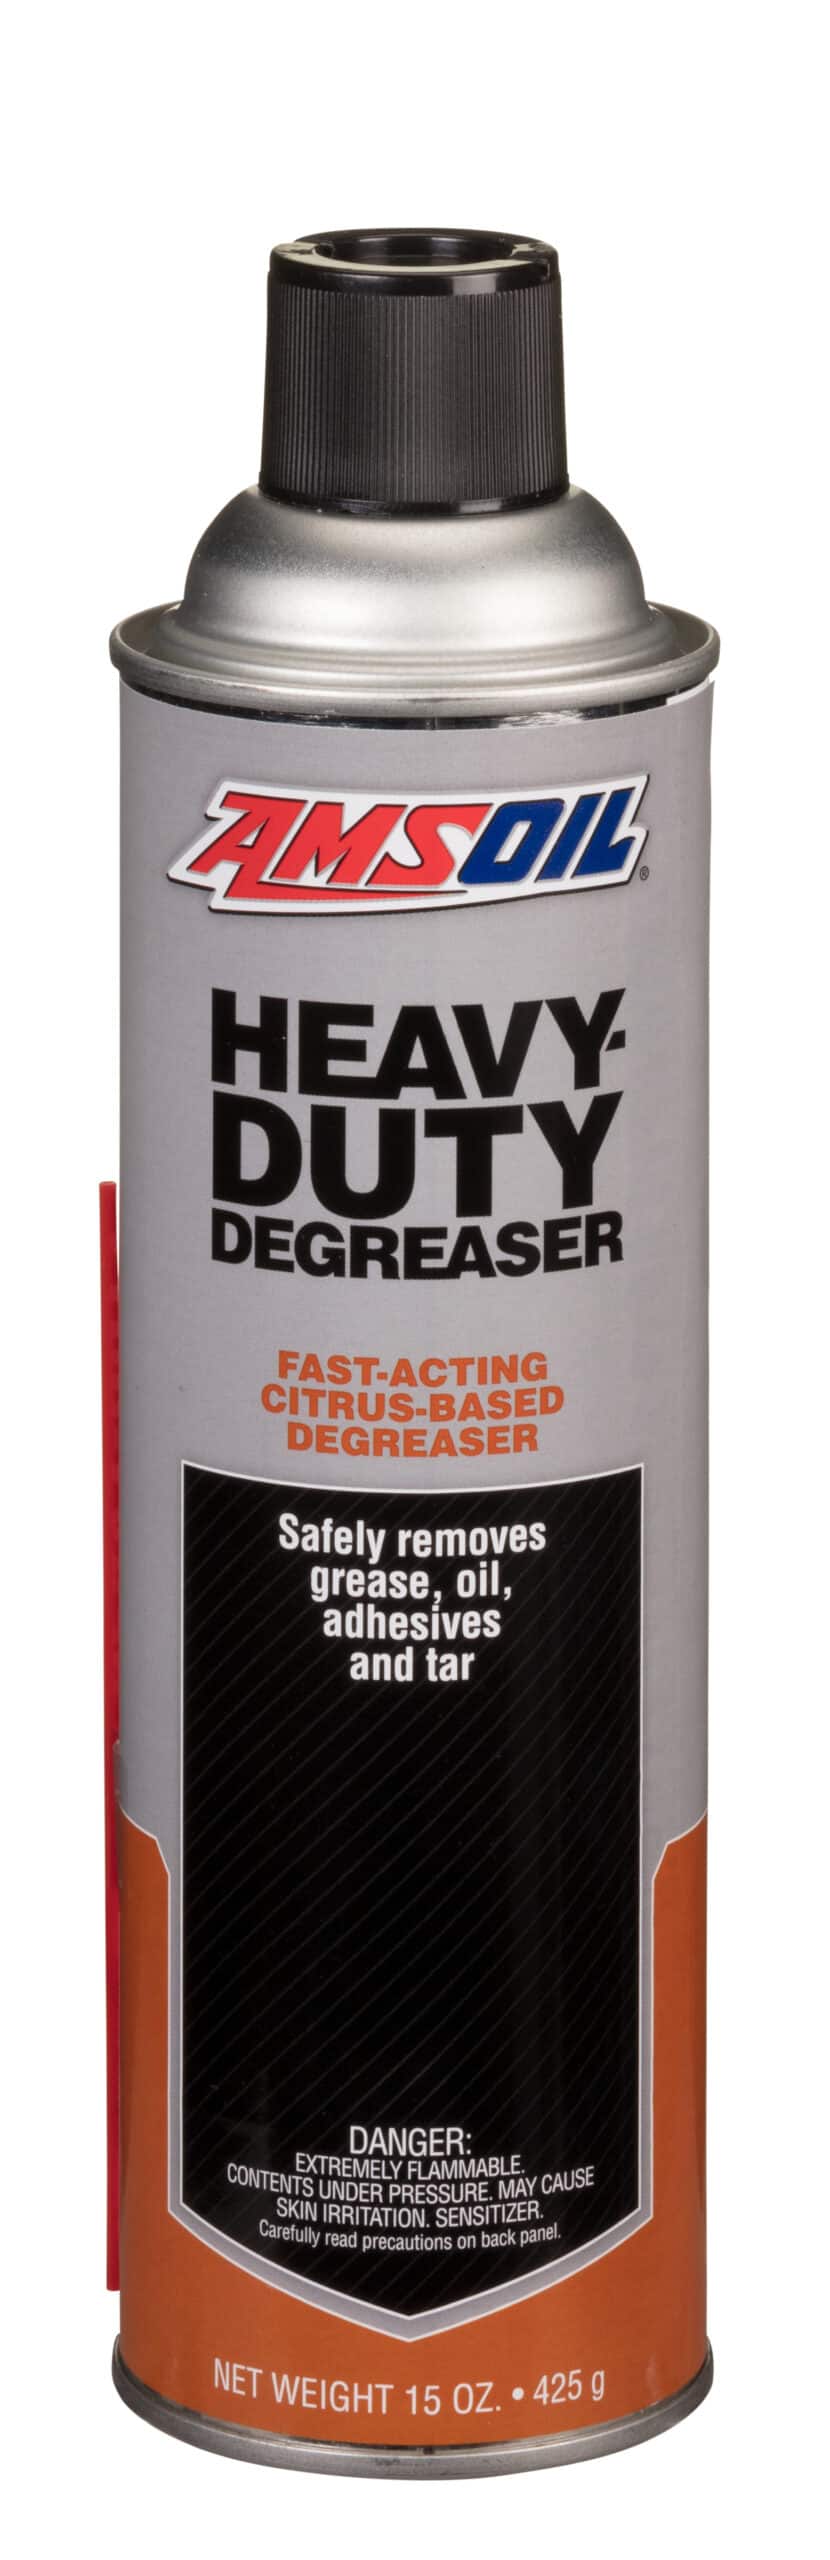 A can of AMSOIL Heavy-Duty Degreaser, formulated with fast-acting solvents to loosen its hold on metal, concrete and other surfaces.